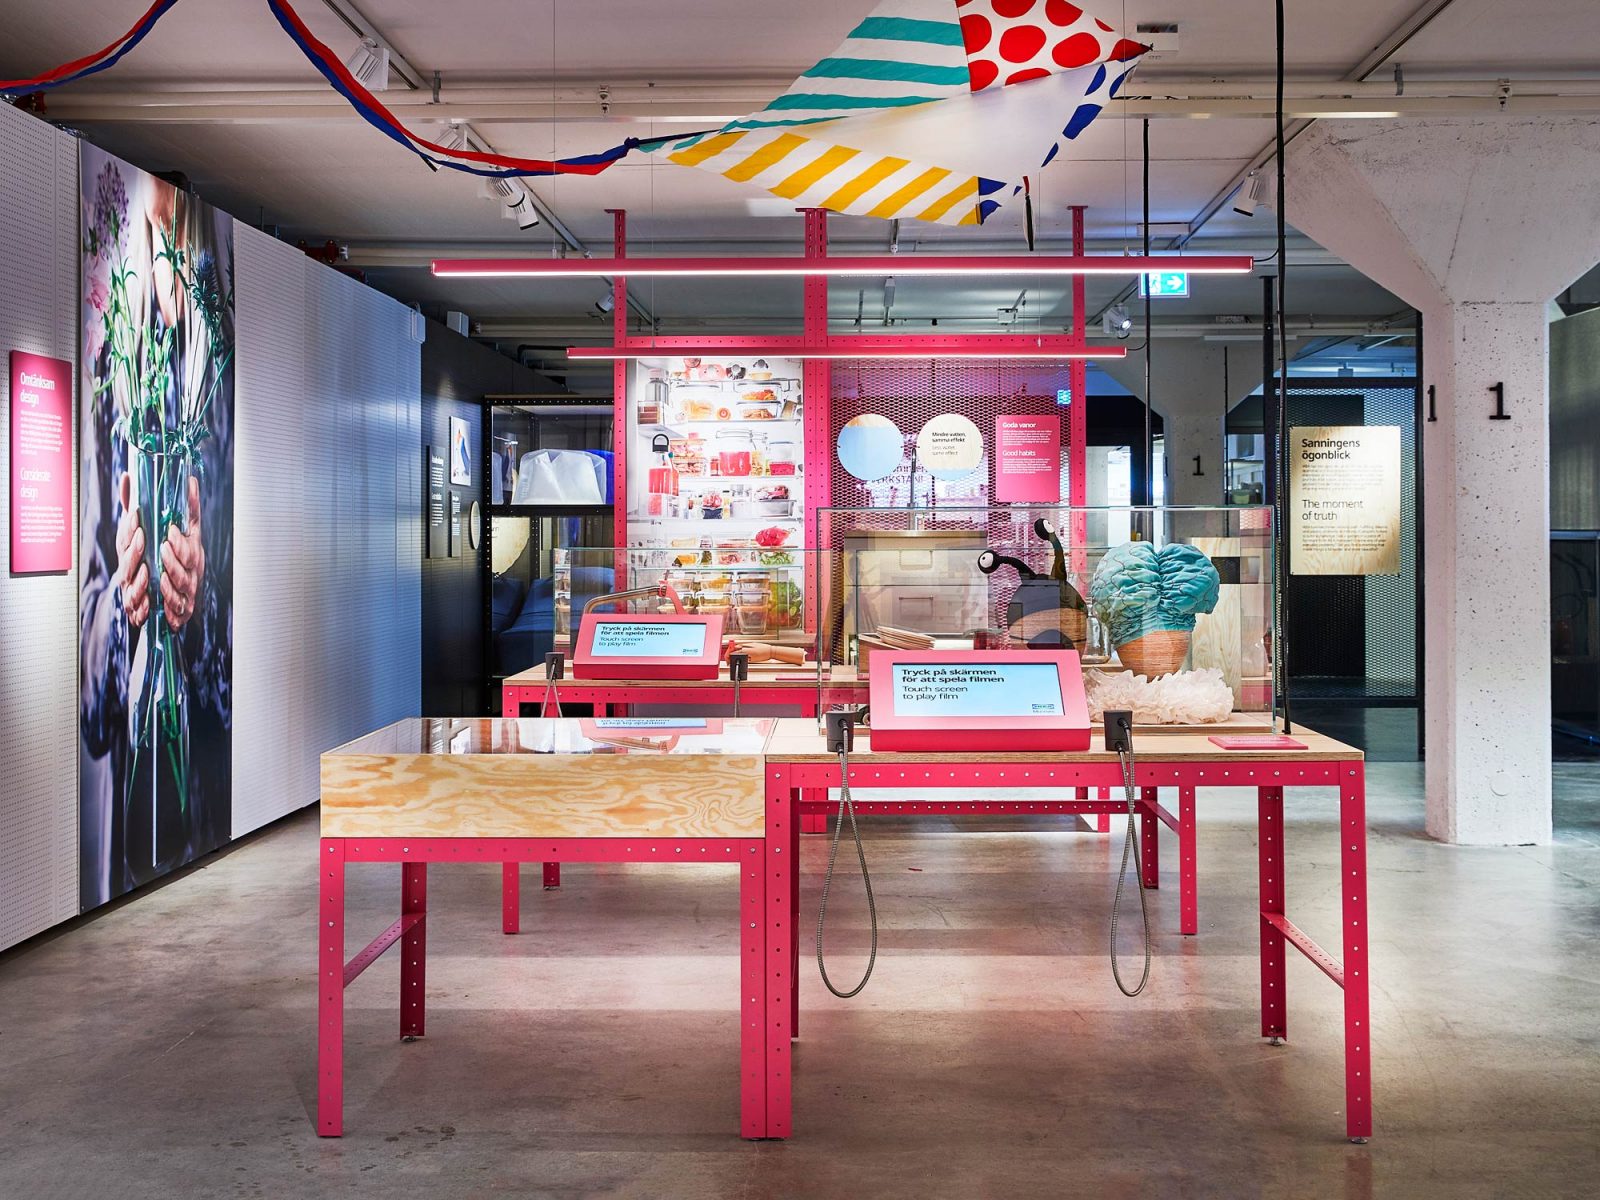 Colourful part of the exhibition Democratic Design with display cases and touch screens on red metal tables.